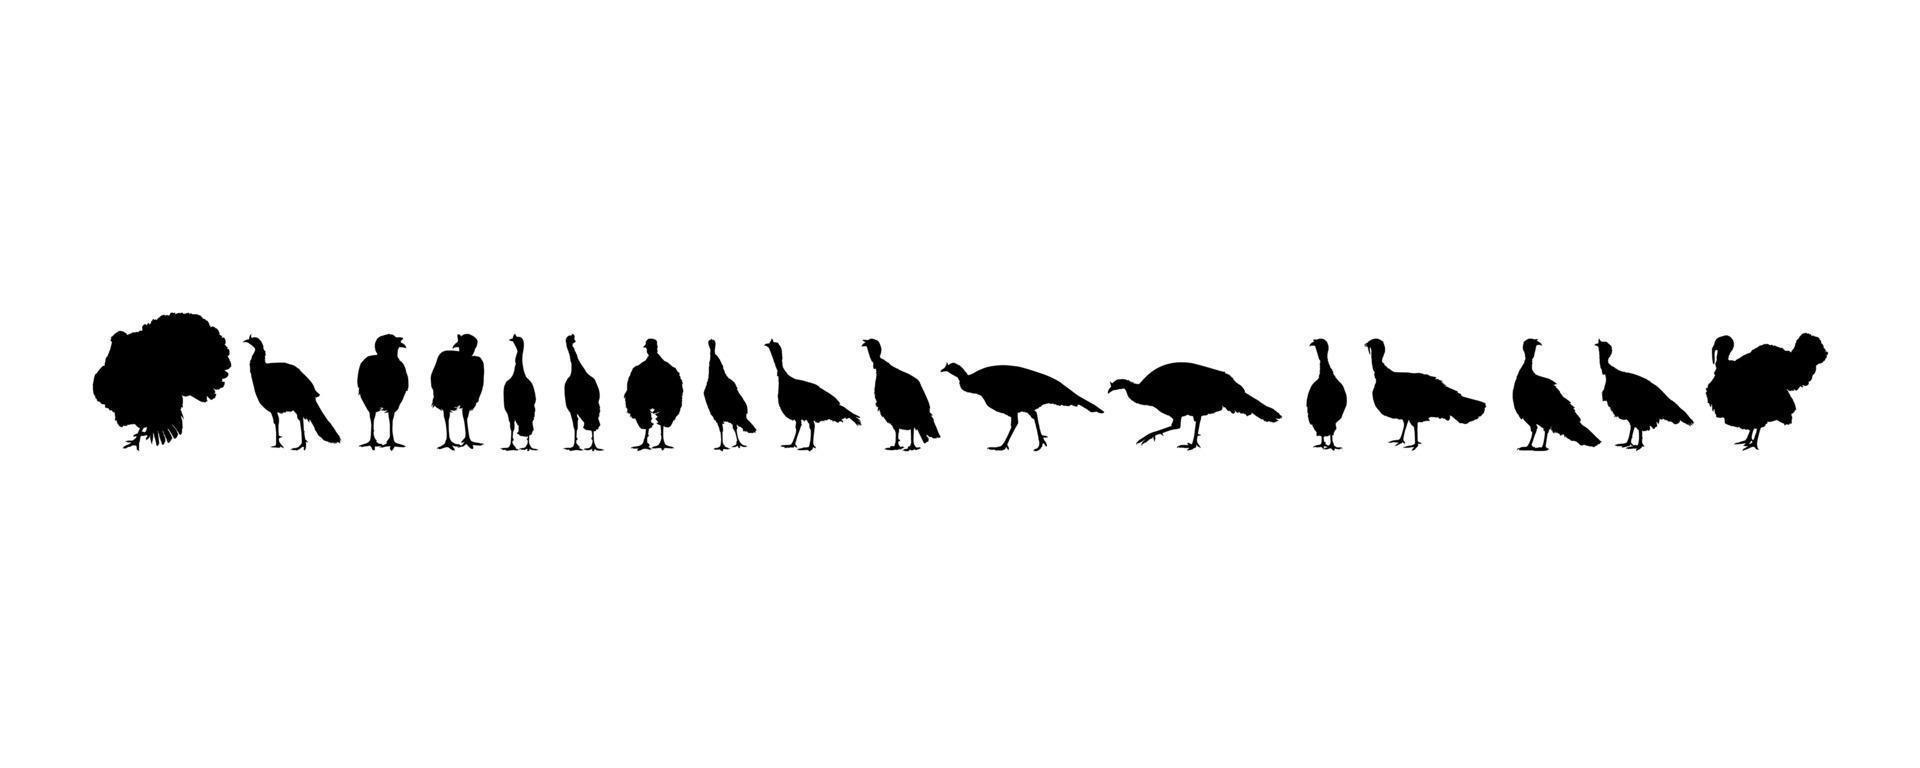 Flock of the Turkey Silhouette for Art Illustration, Pictogram or Graphic Design Element. The Turkey is a large bird in the genus Meleagris. Vector Illustration